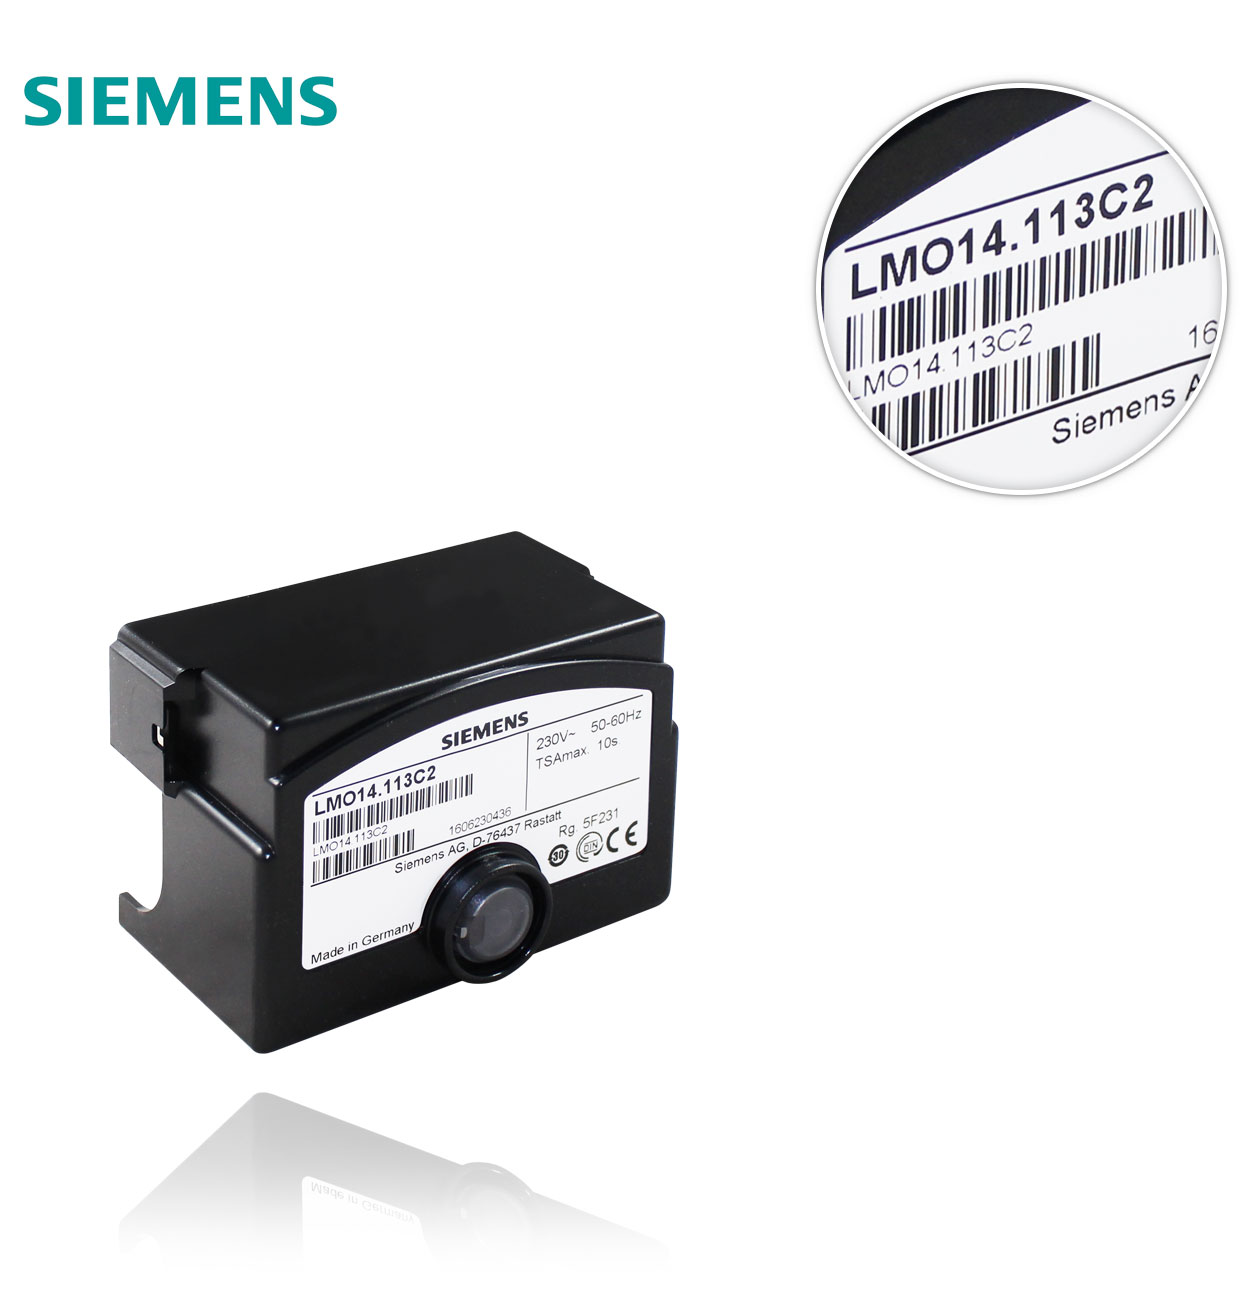 Siemens product collection